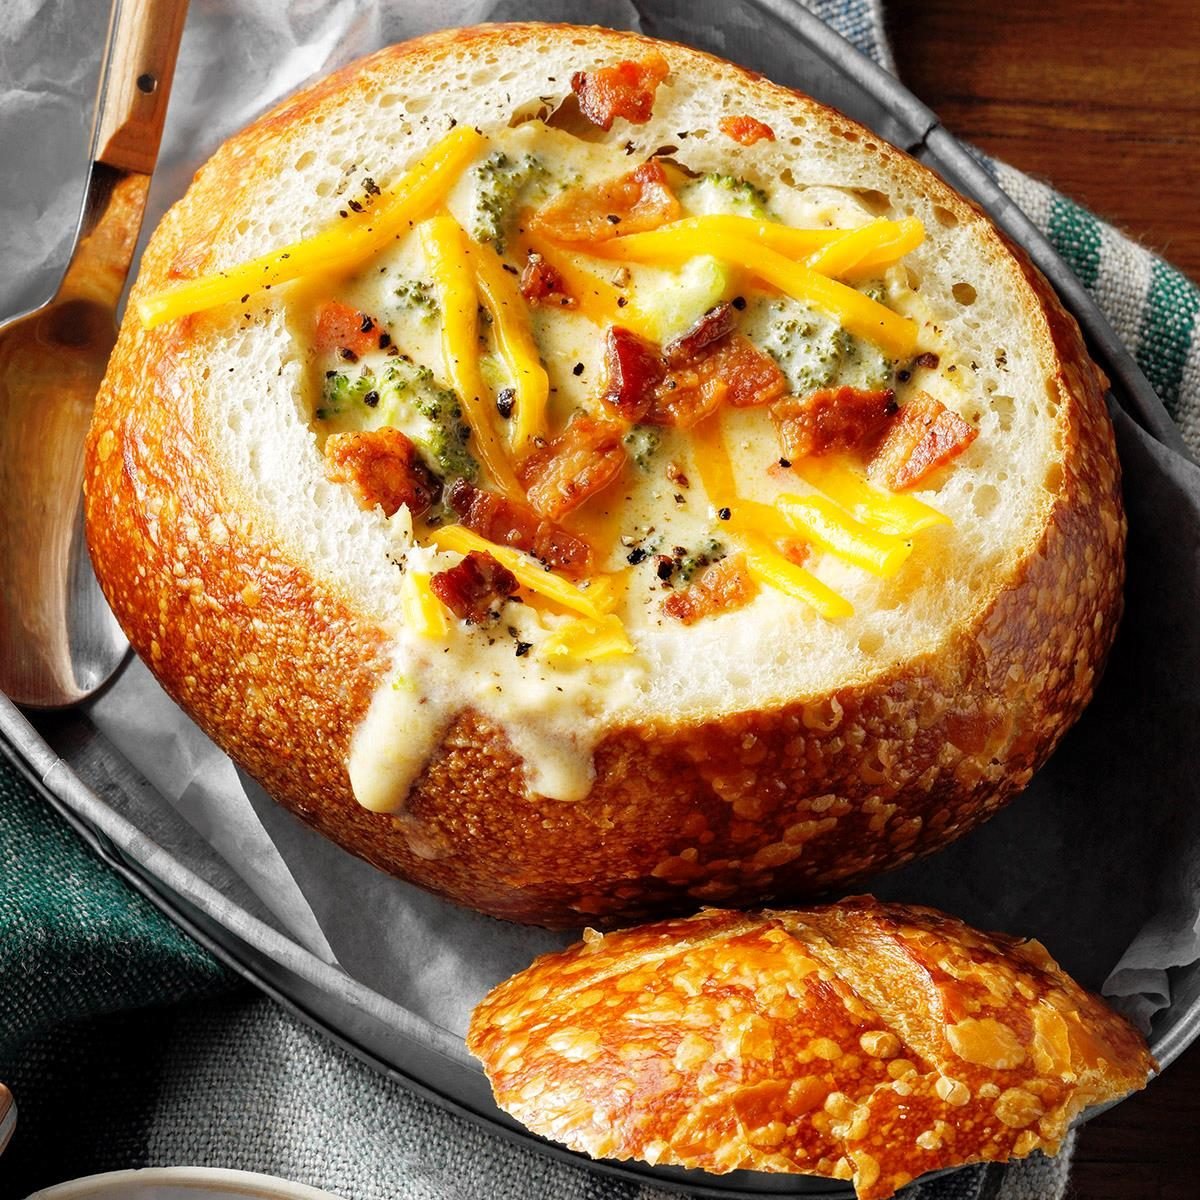 https://www.tasteofhome.com/wp-content/uploads/2018/01/Cheesy-Broccoli-Soup-in-a-Bread-Bowl_EXPS_TOHcom22_191564_P2_MD_05_11_5b.jpg